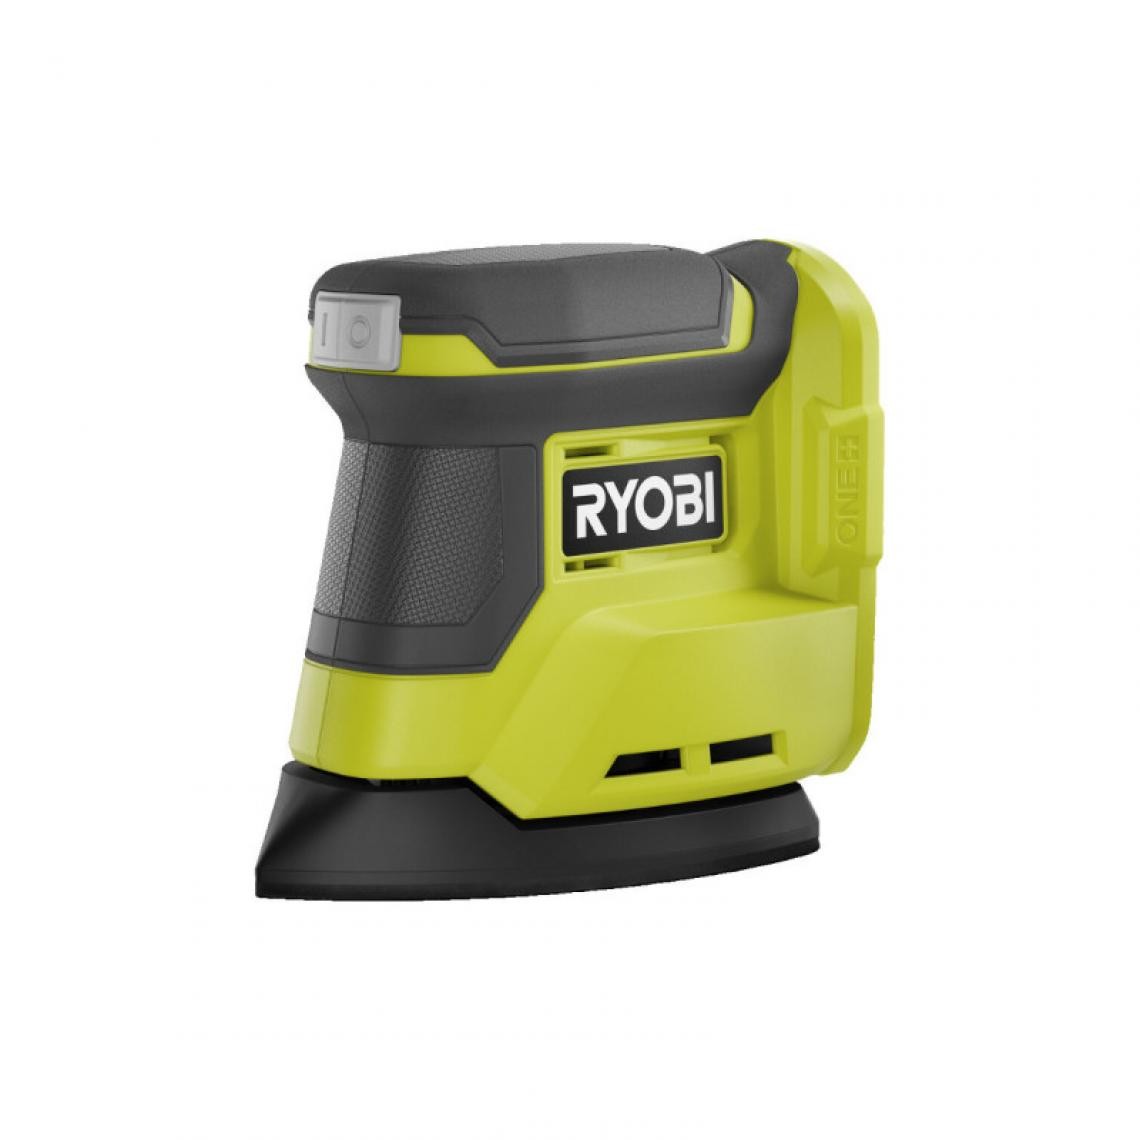 Ryobi - Ponceuse triangulaire RYOBI - 18V OnePlus - sans batterie ni chargeur - RPS18-0 - Ponceuses excentriques